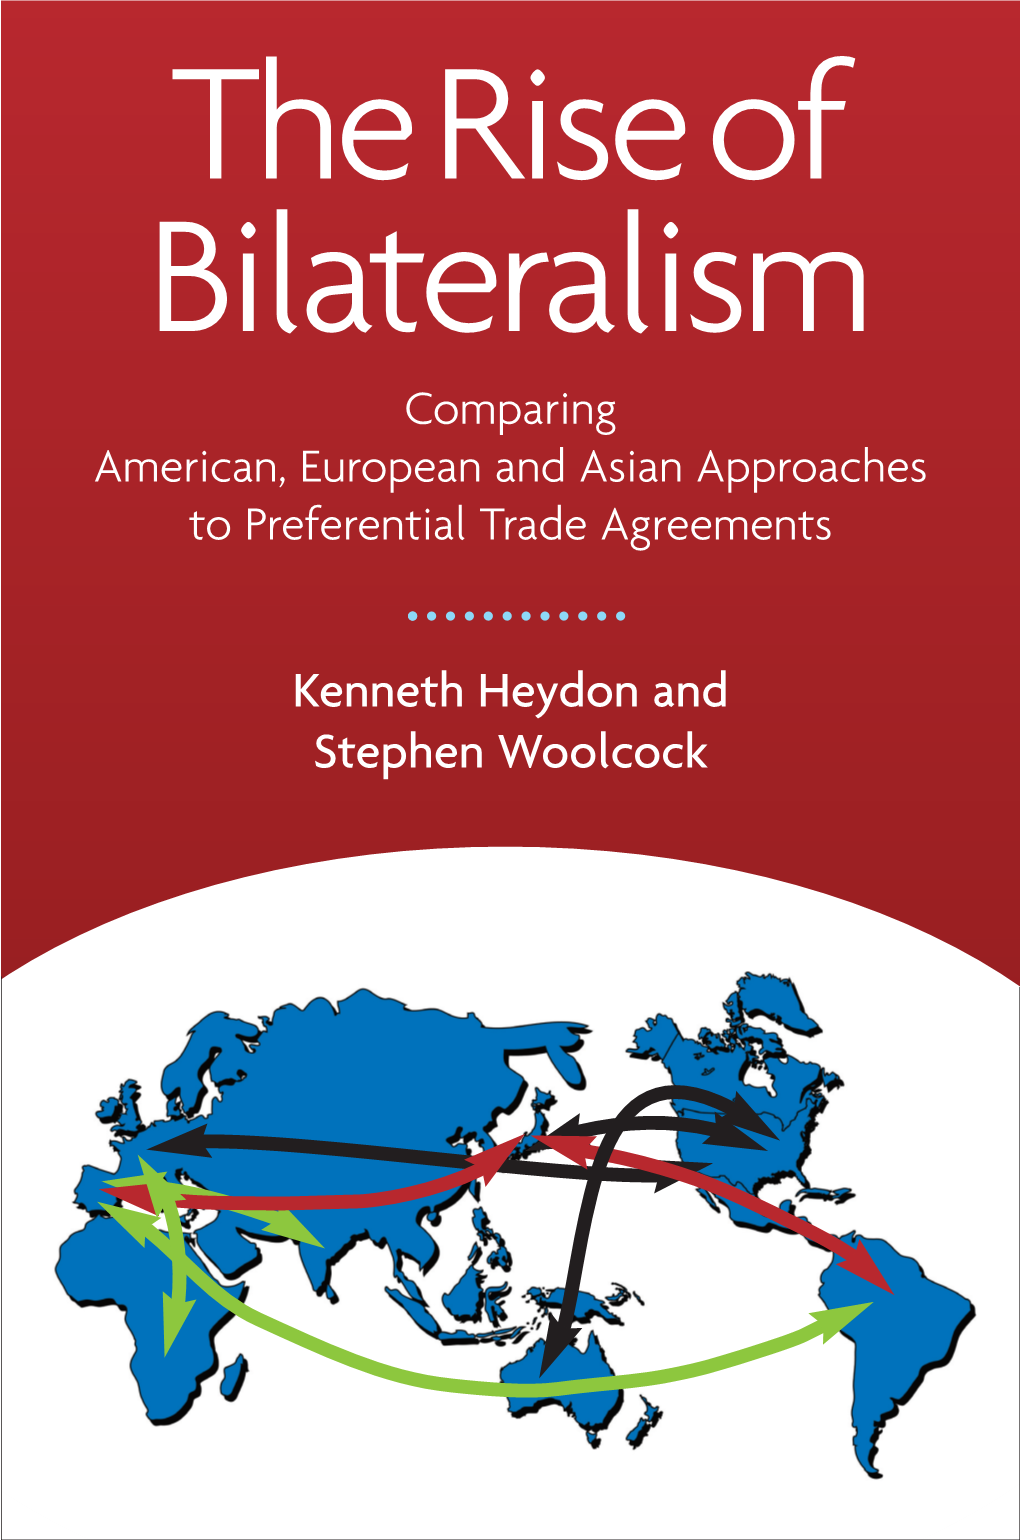 The Rise of Bilateralism: Comparing American, European and Asian Approaches to Preferential Trade Agreements